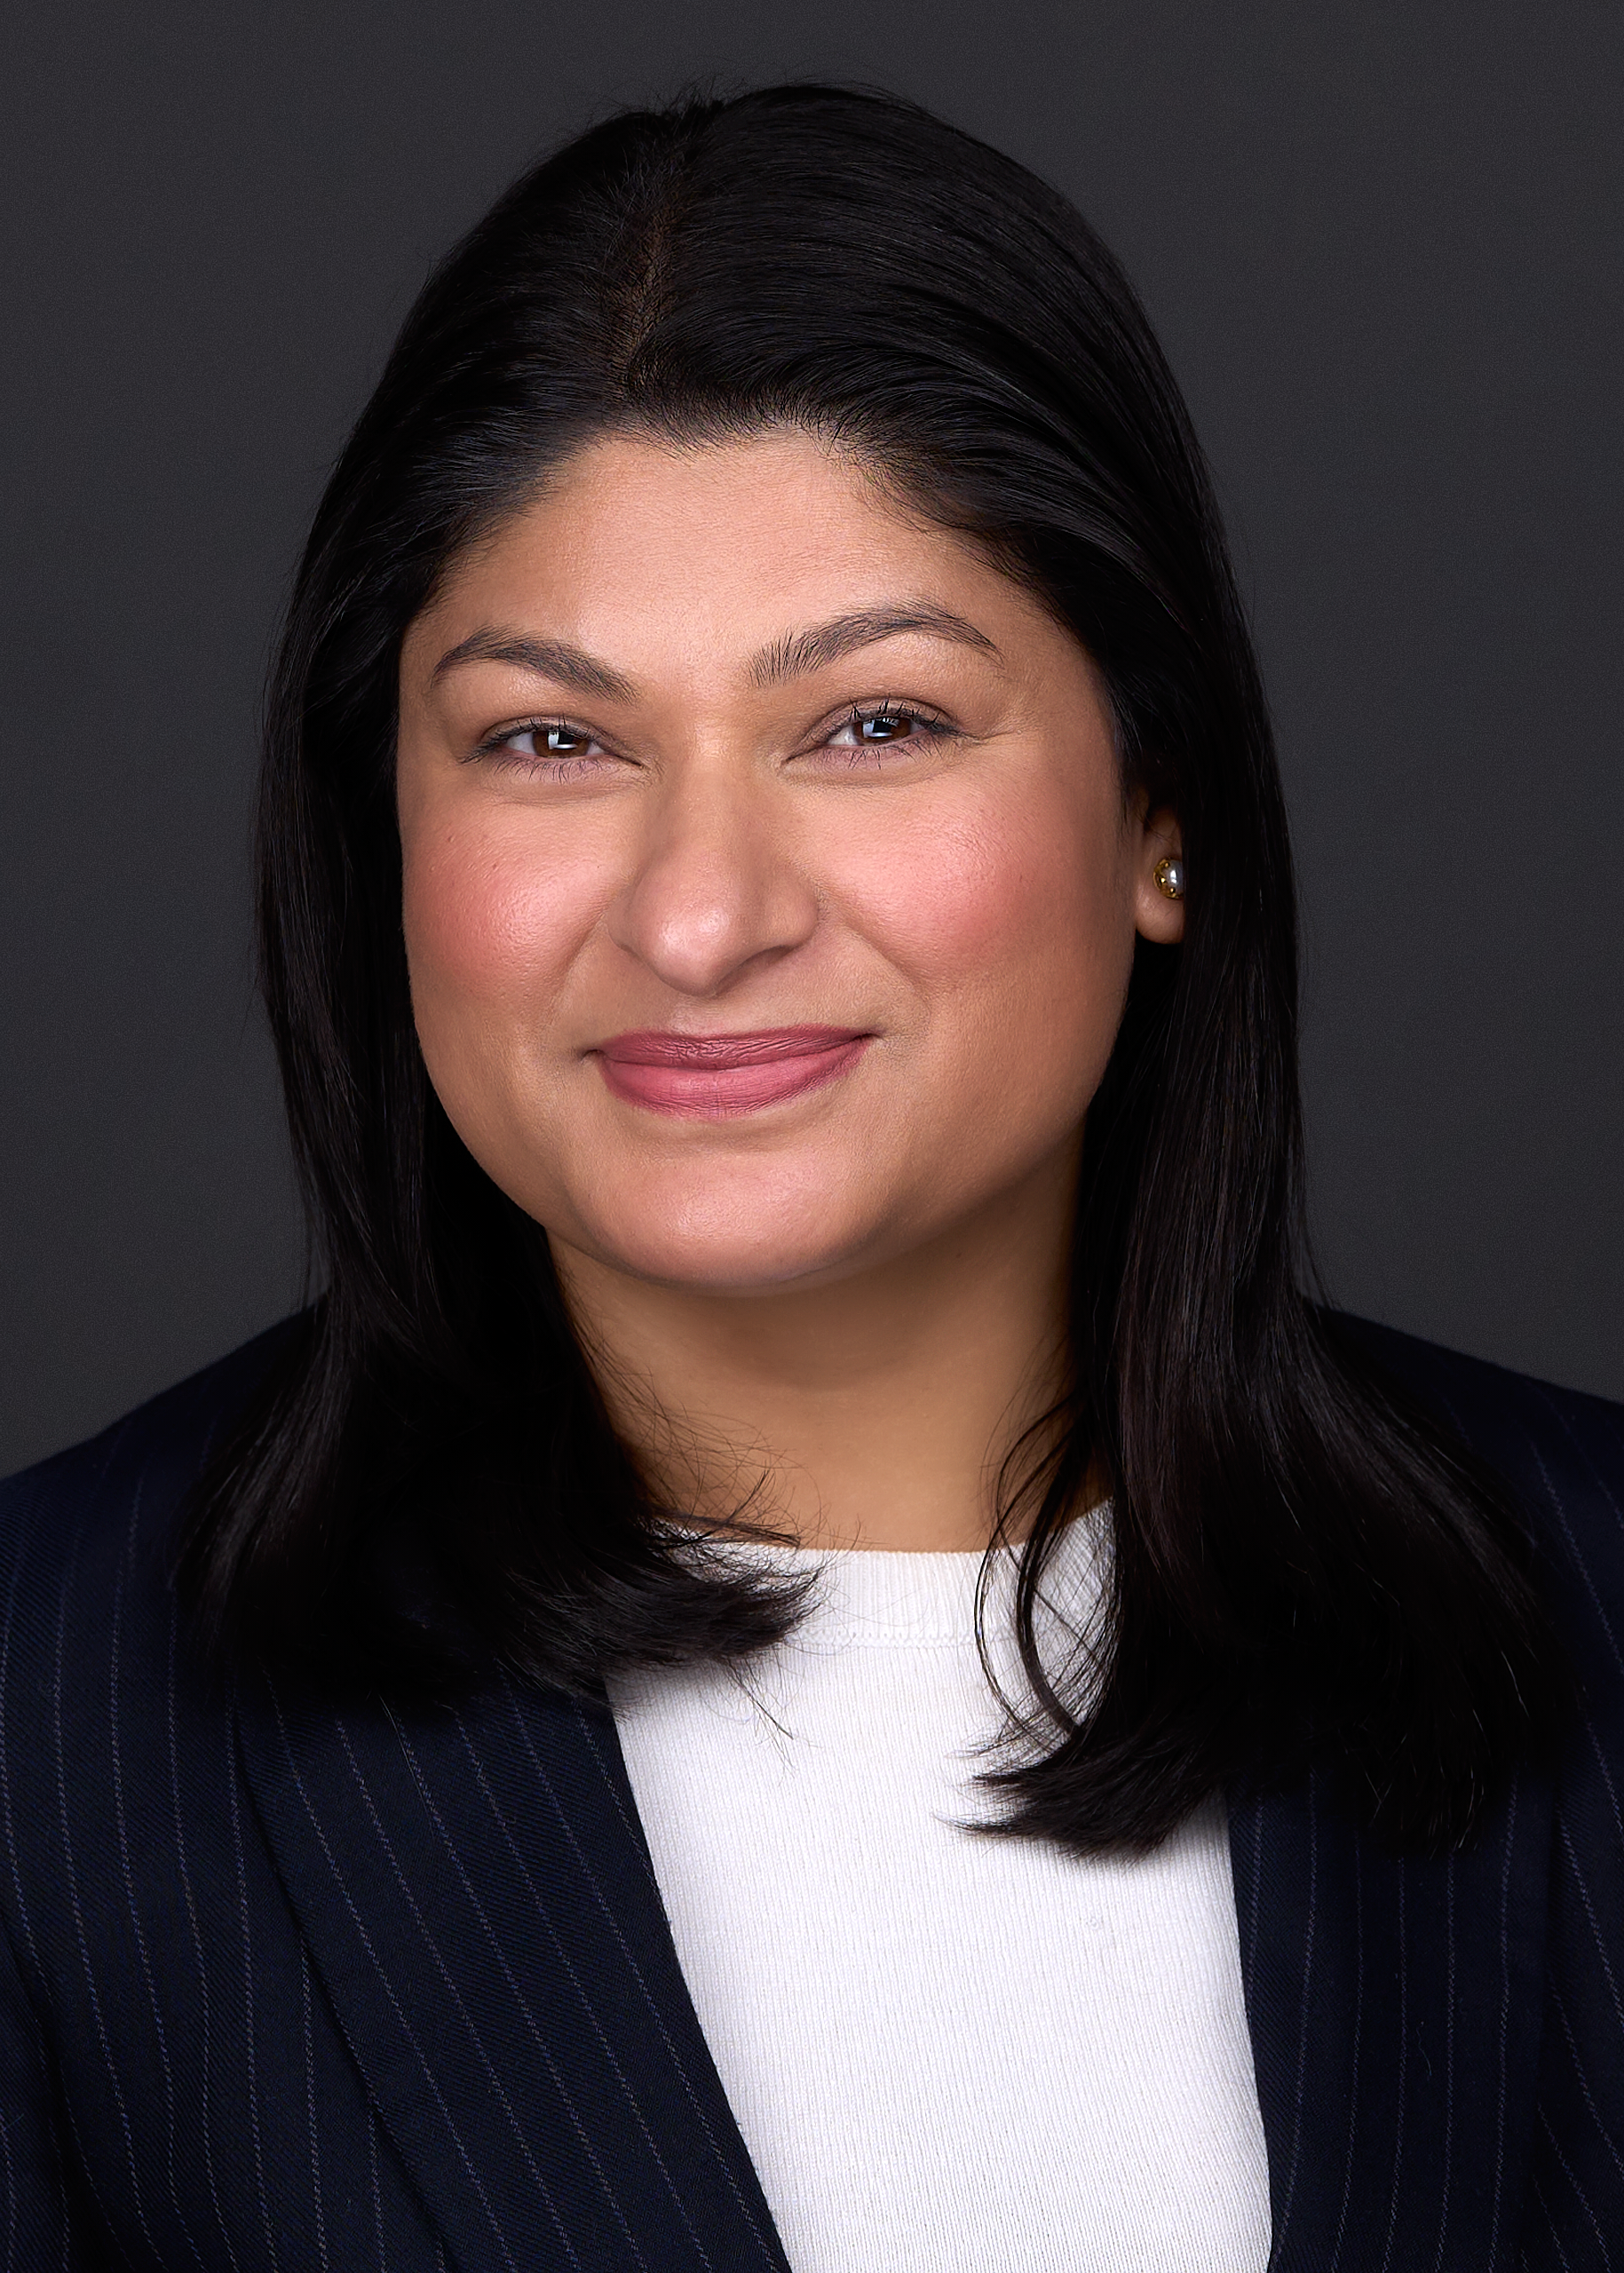 A Hispanic women with black hair wears a blue suit while sitting for a professional headshot in Raleigh NC